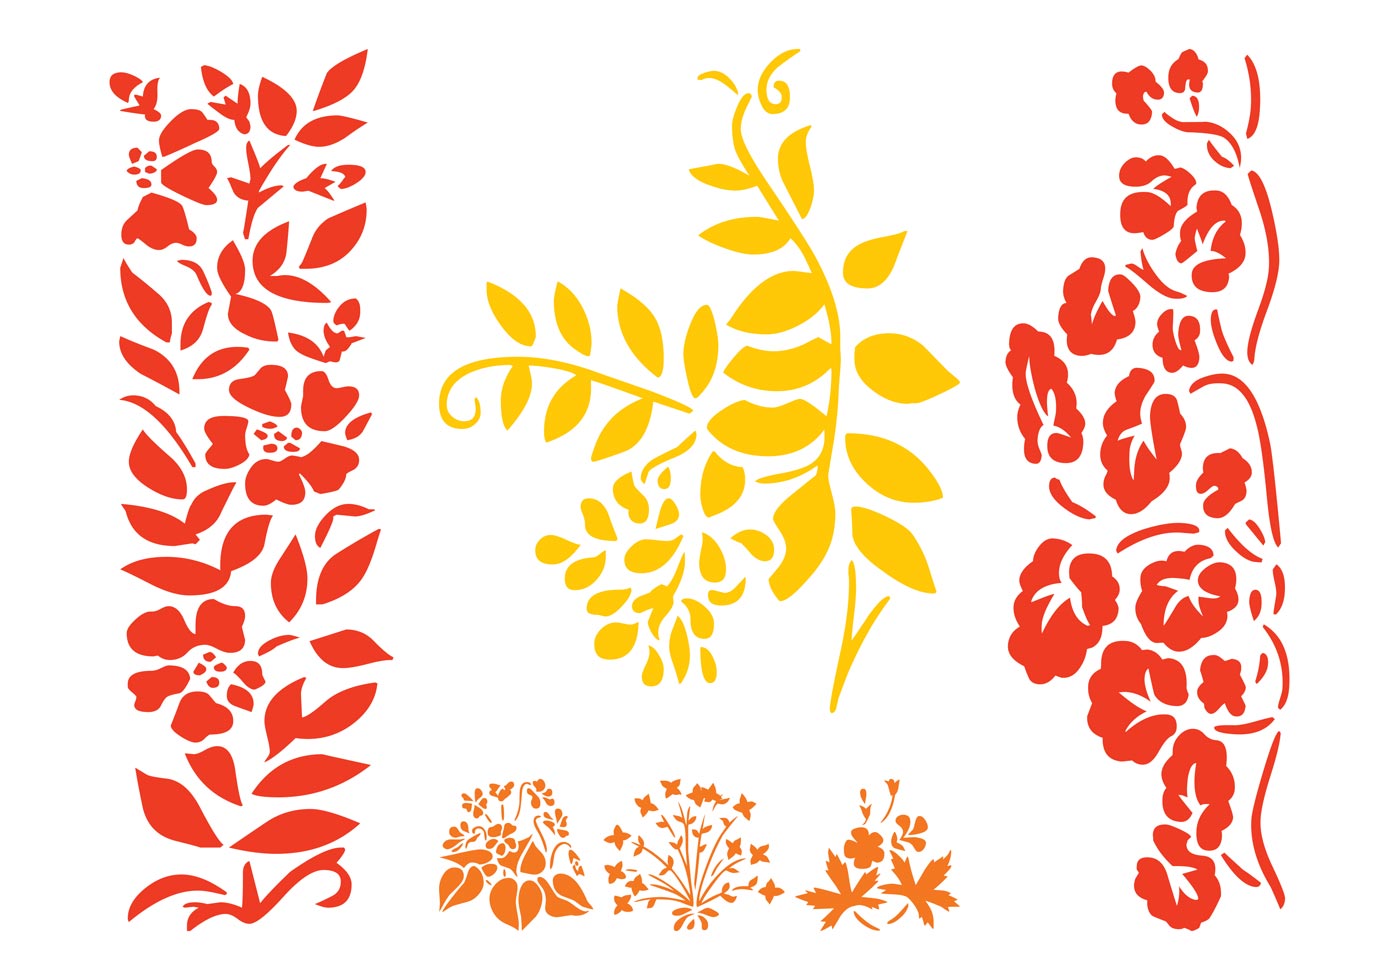 Download Flower Silhouettes Set - Download Free Vector Art, Stock ...